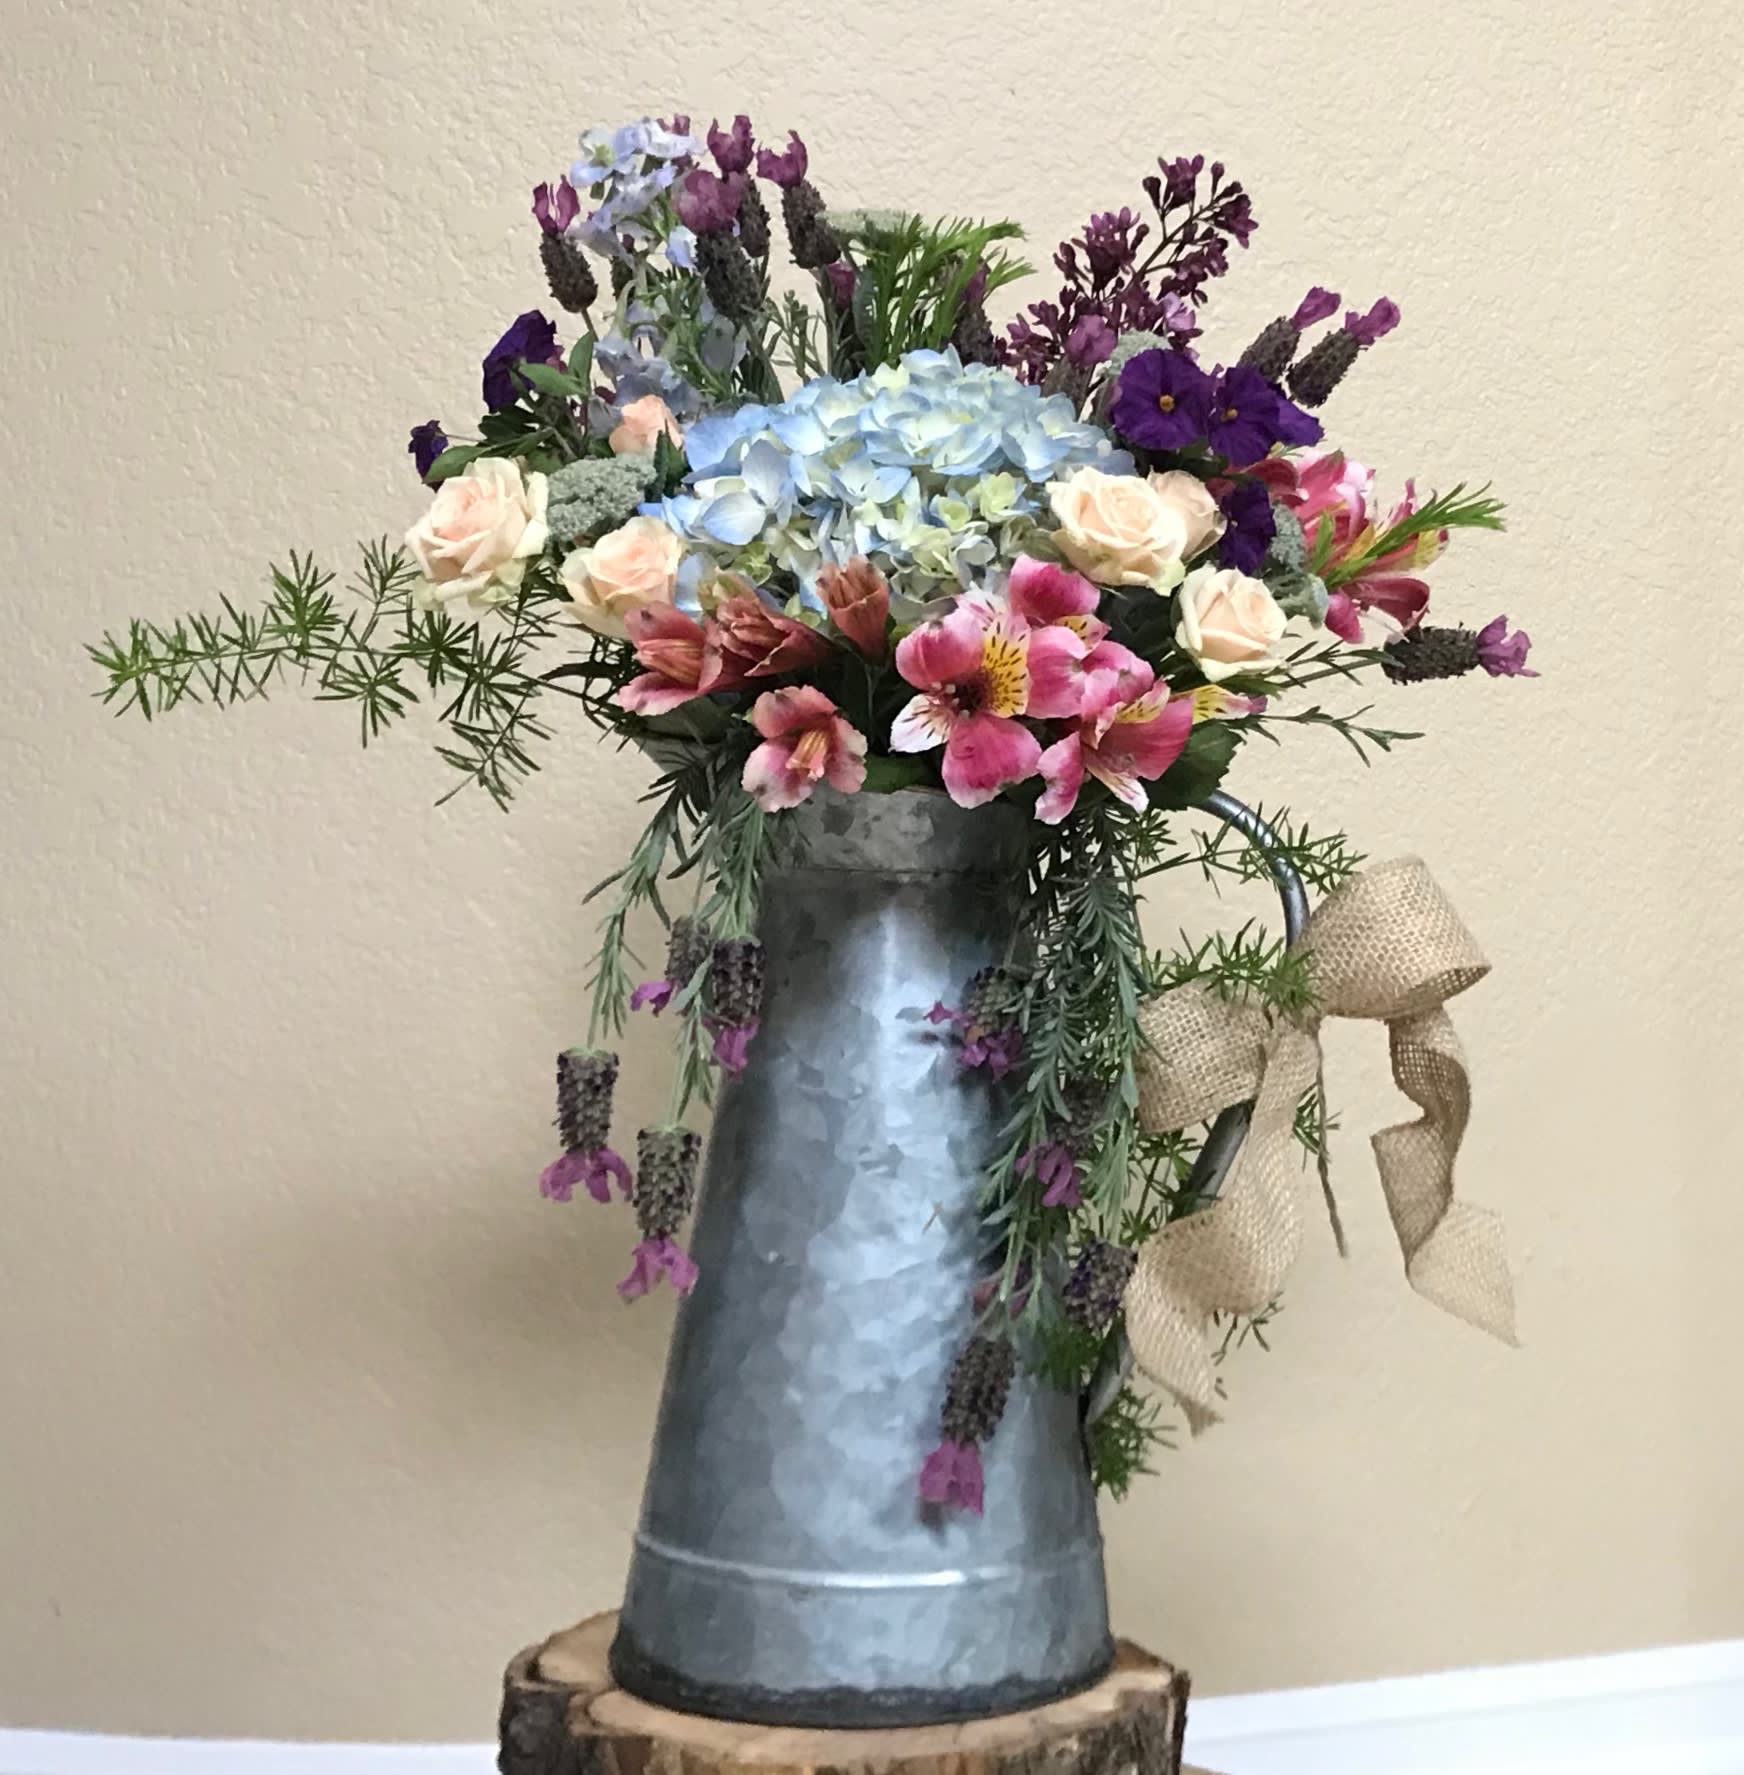 Rustic Gal -vanized &quot;Oakbrook Florist Original&quot; - A perfect addition to farmhouse decor or any decor, featuring shades of blue, purple and pink with hydrangea, aromatic lavender, alstroemeria, and other spring flowers in a galvanized watering can.